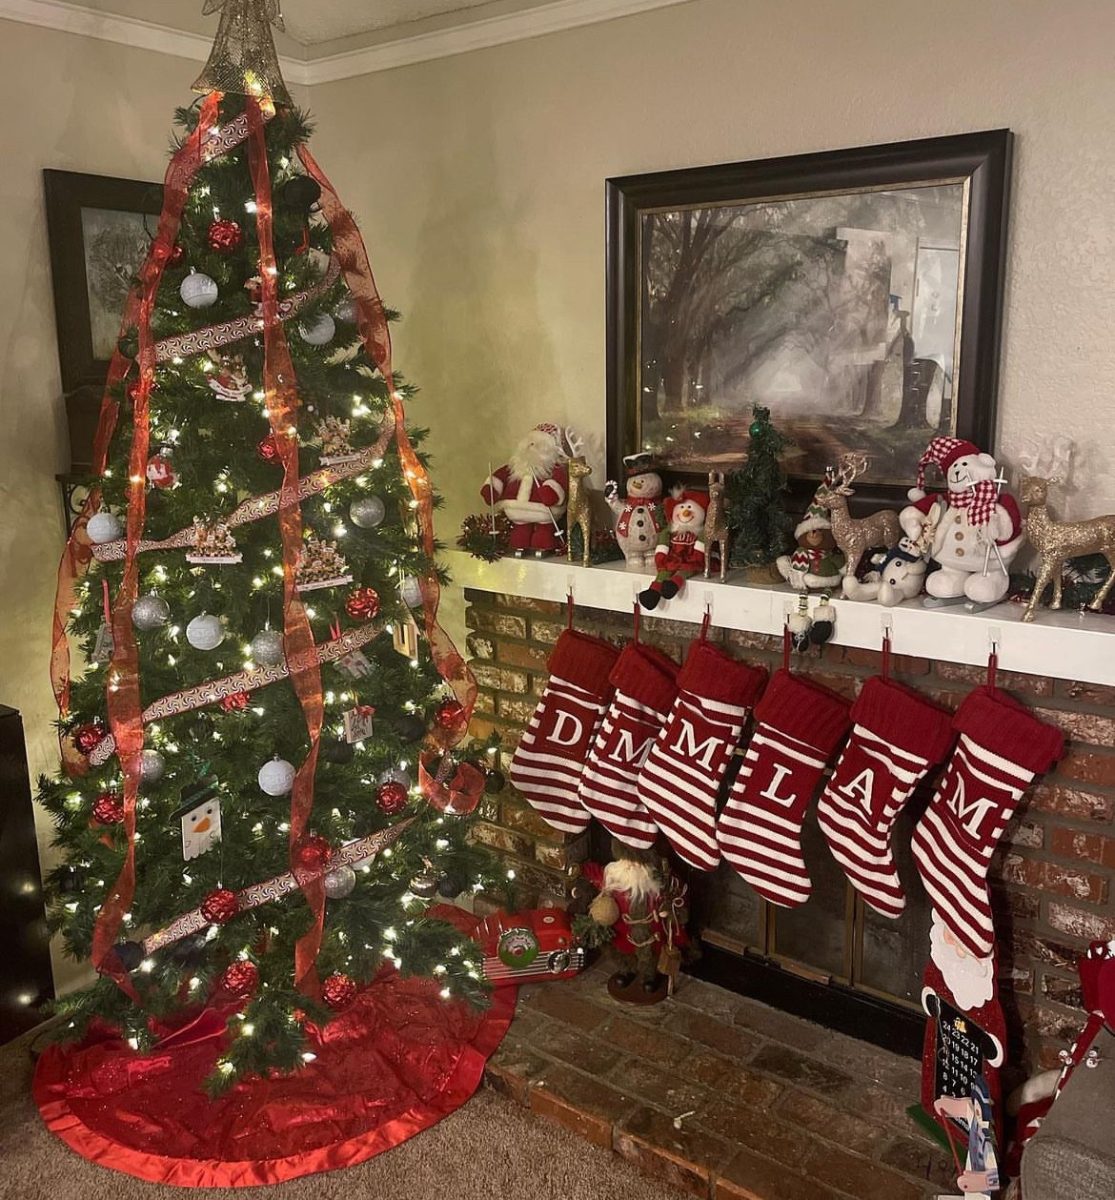 A decorated Christmas tree is perfect to sit by while watching a classic Christmas movie. Being warm, cozy, sipping hot cocoa, and watching Christmas movies. 